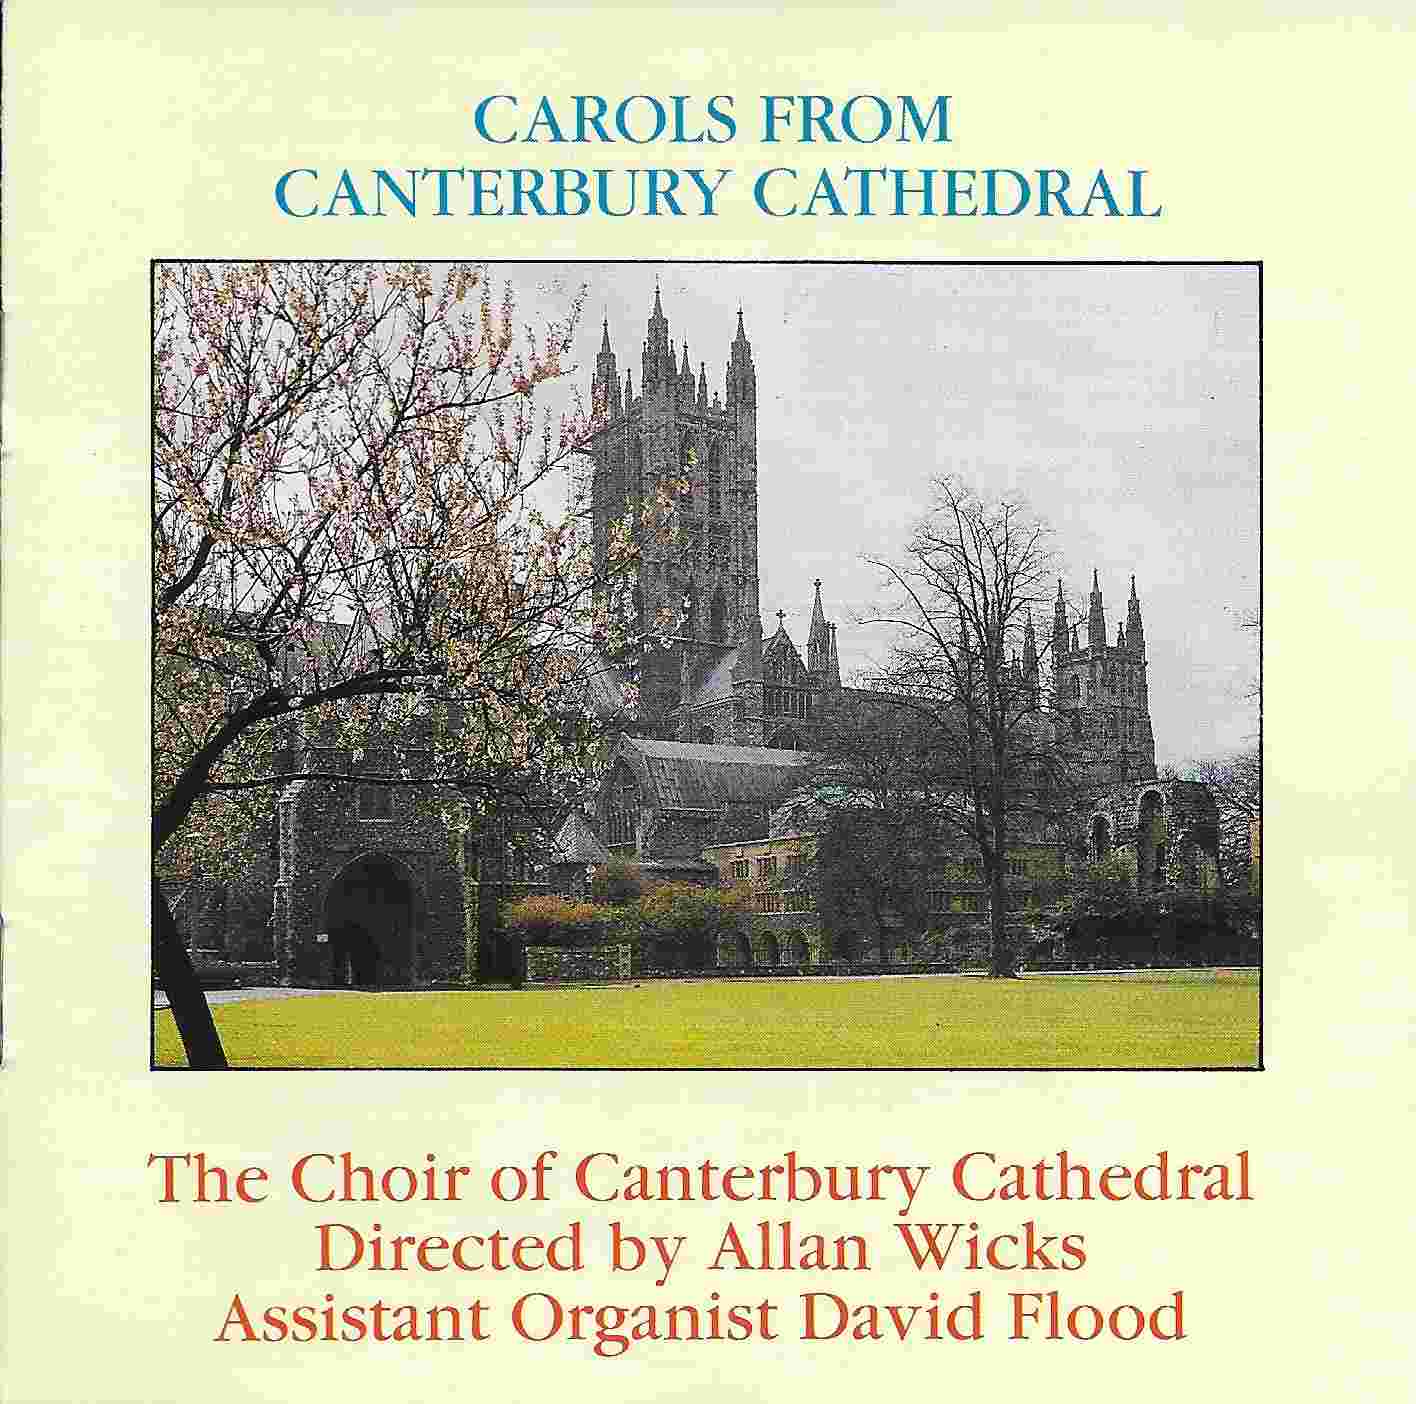 Picture of Christmas carols from Canterbury Cathedral by artist Various from the BBC cds - Records and Tapes library